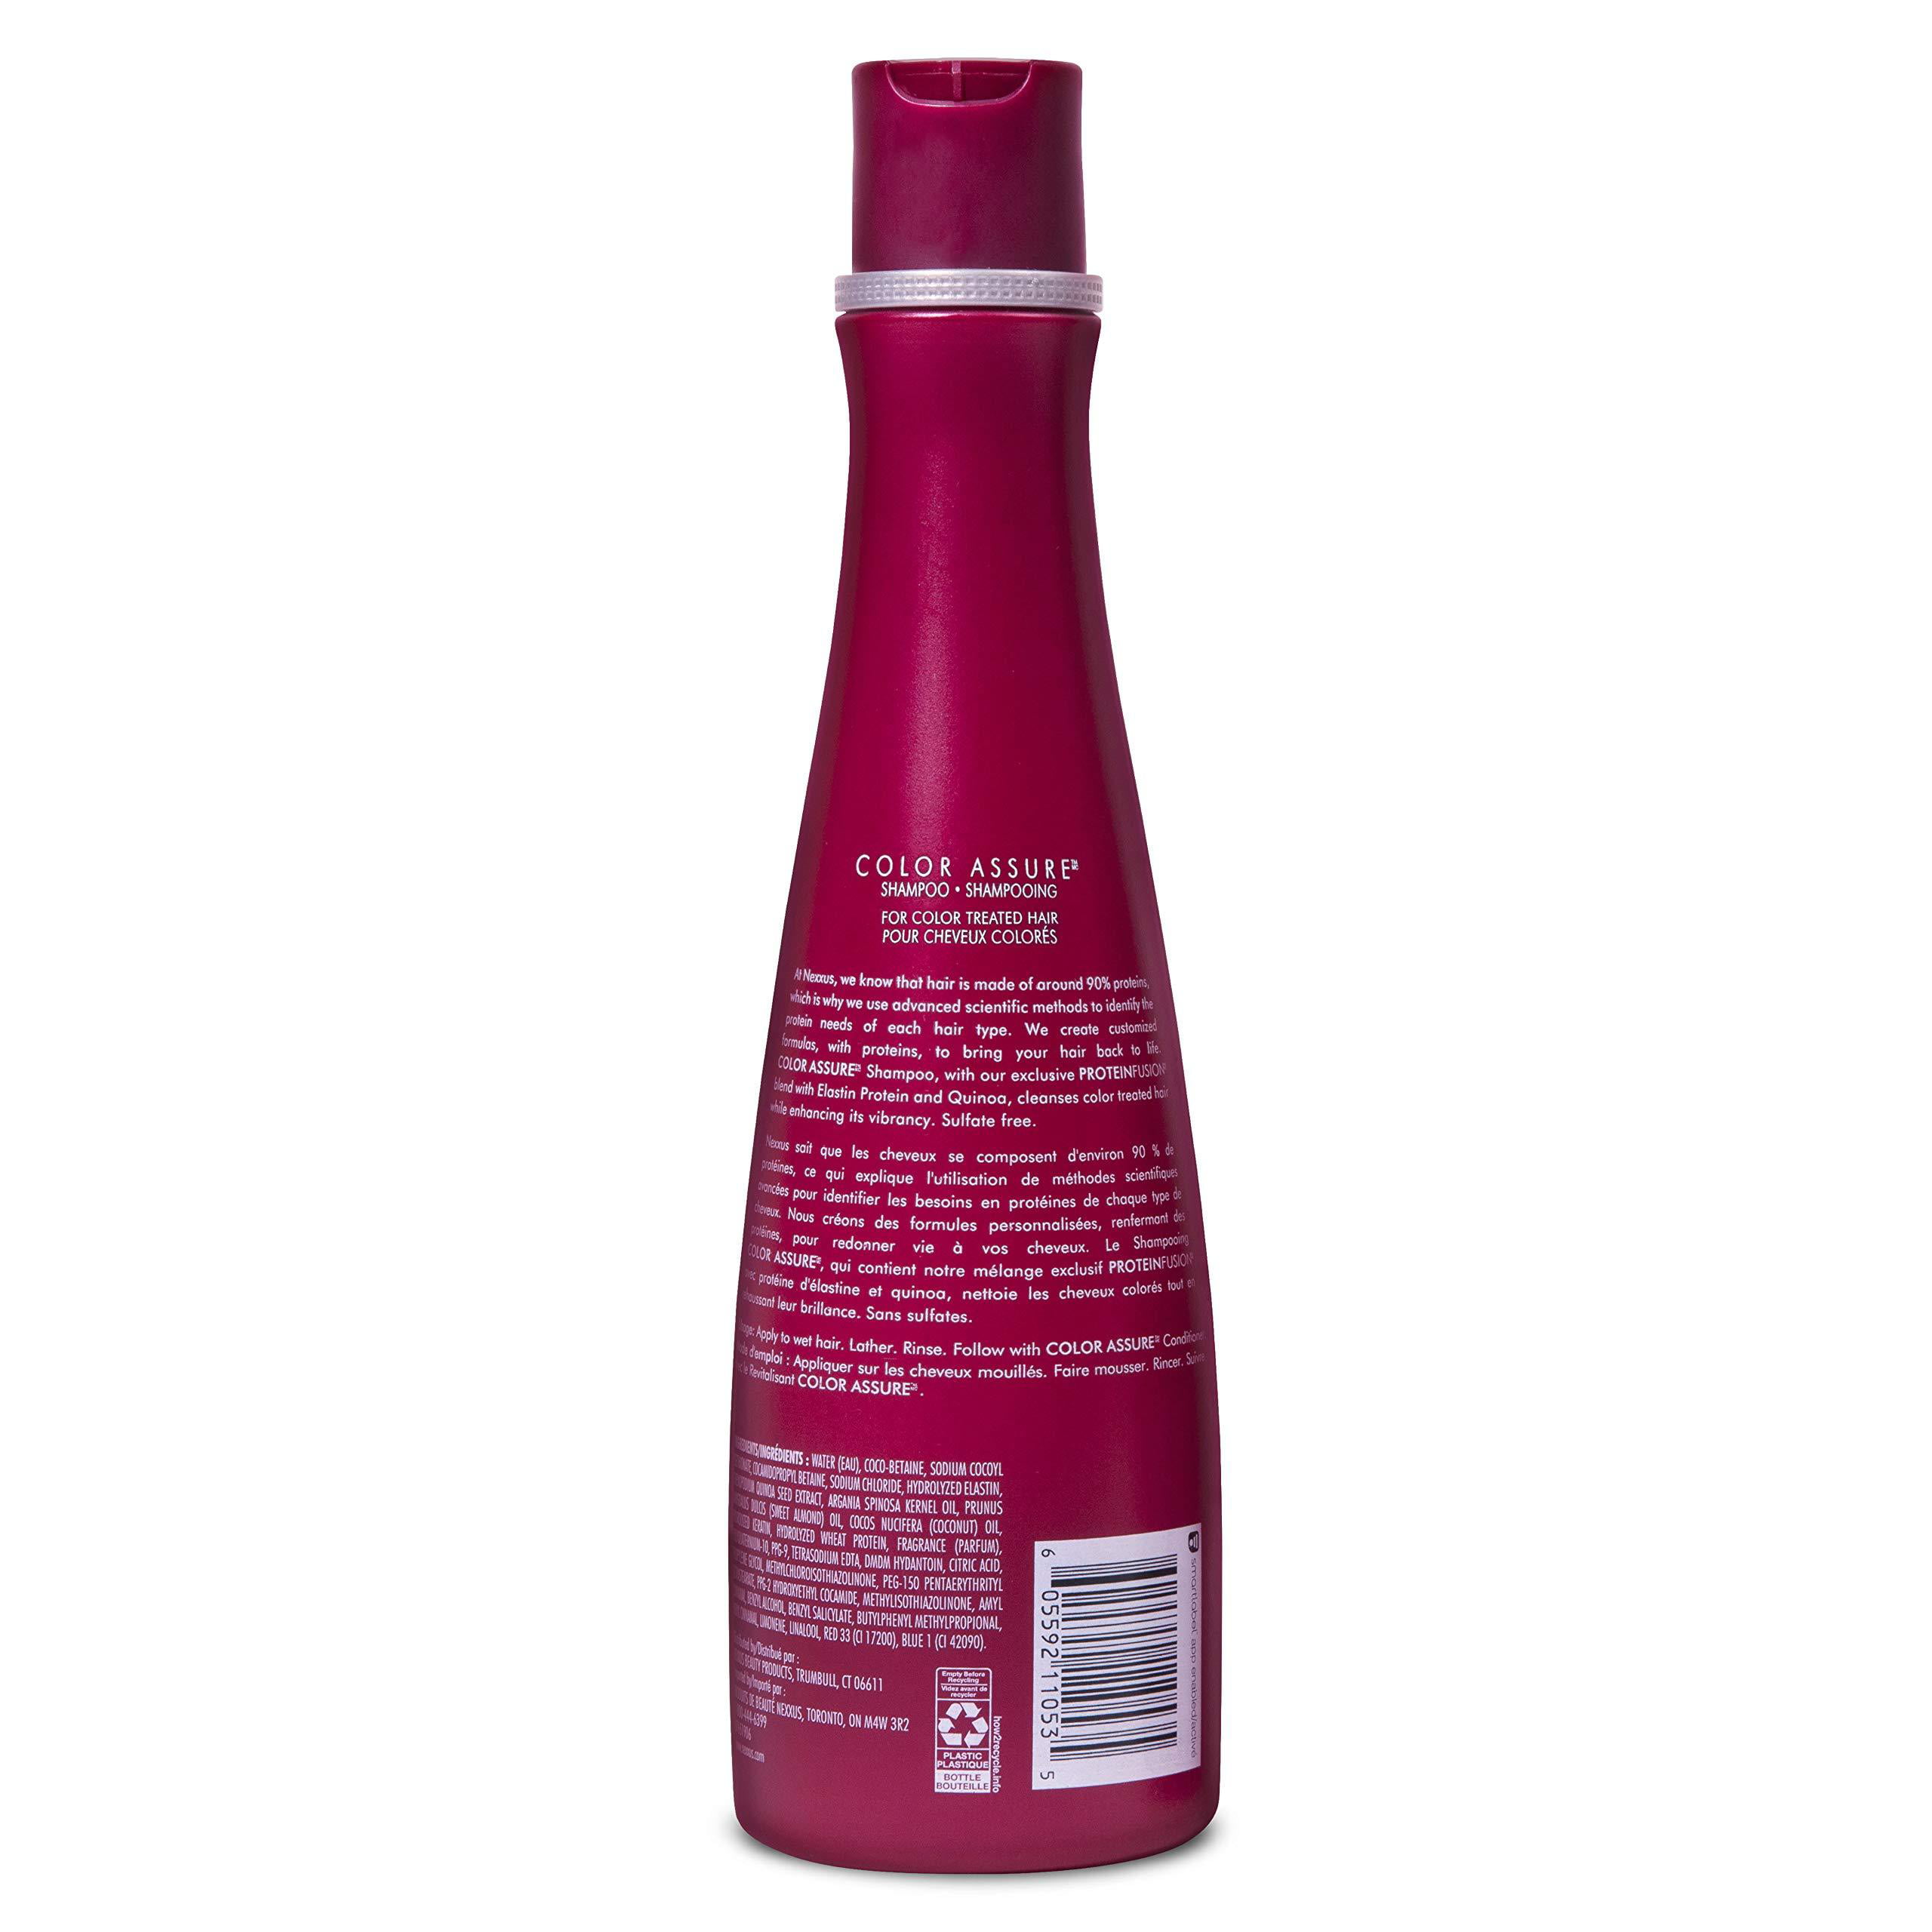 jul fornuft gås Nexxus Color Assure Shampoo for Color Treated Hair ProteinFusion Sulfate  Free, 0% Silicone 13.5 oz Color Assure, Elastin Protein - Walmart.com